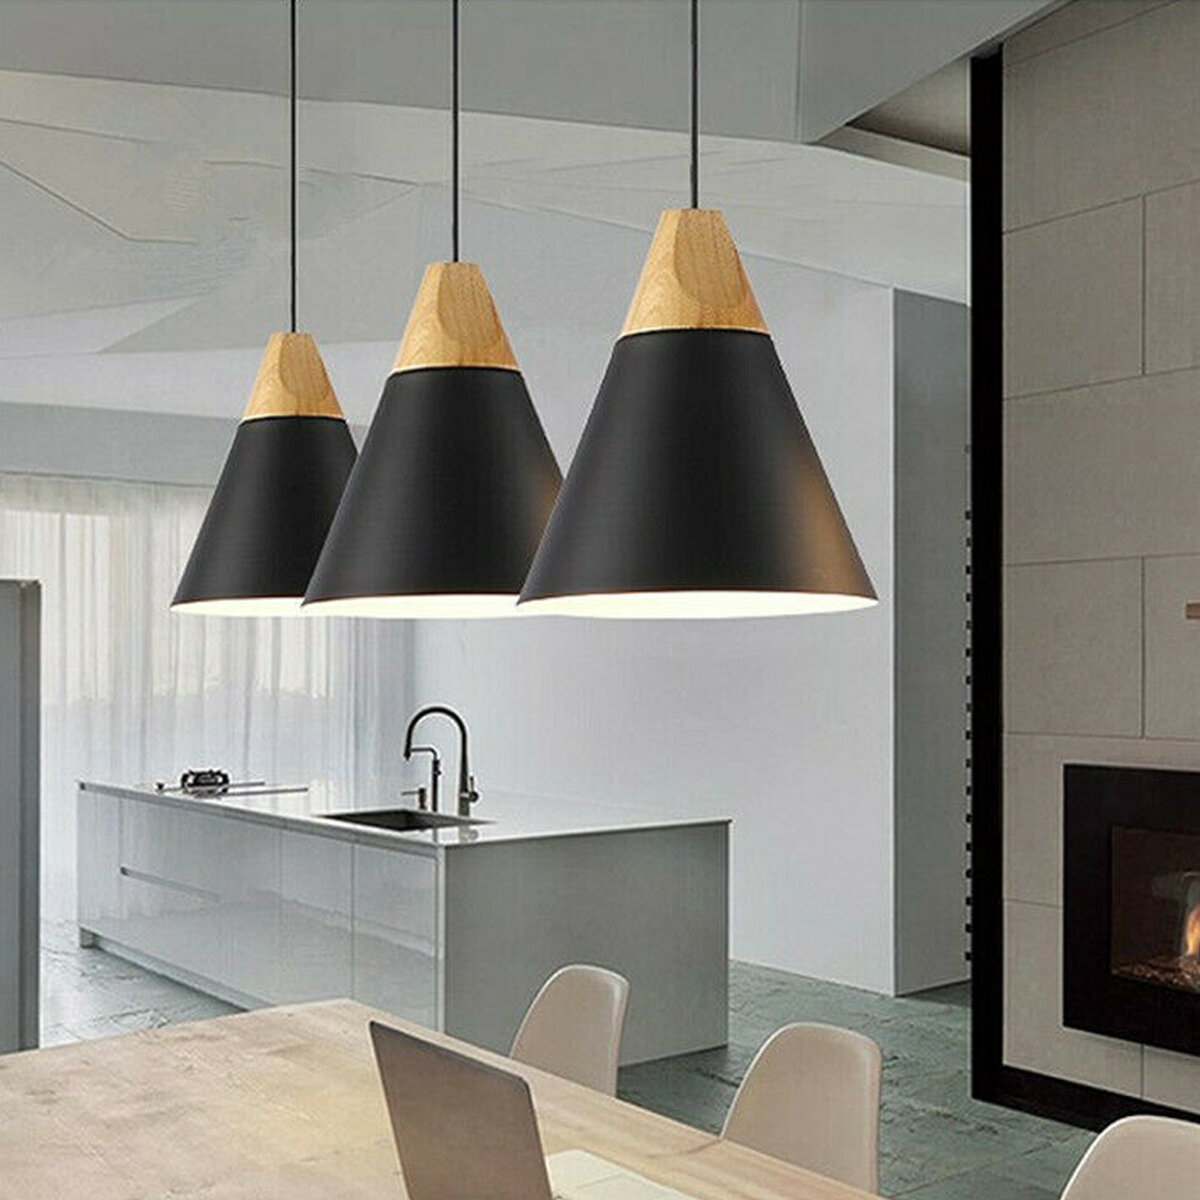 Modern Pendant Lighting Nordic, How Big Should Light Be Over Dining Table